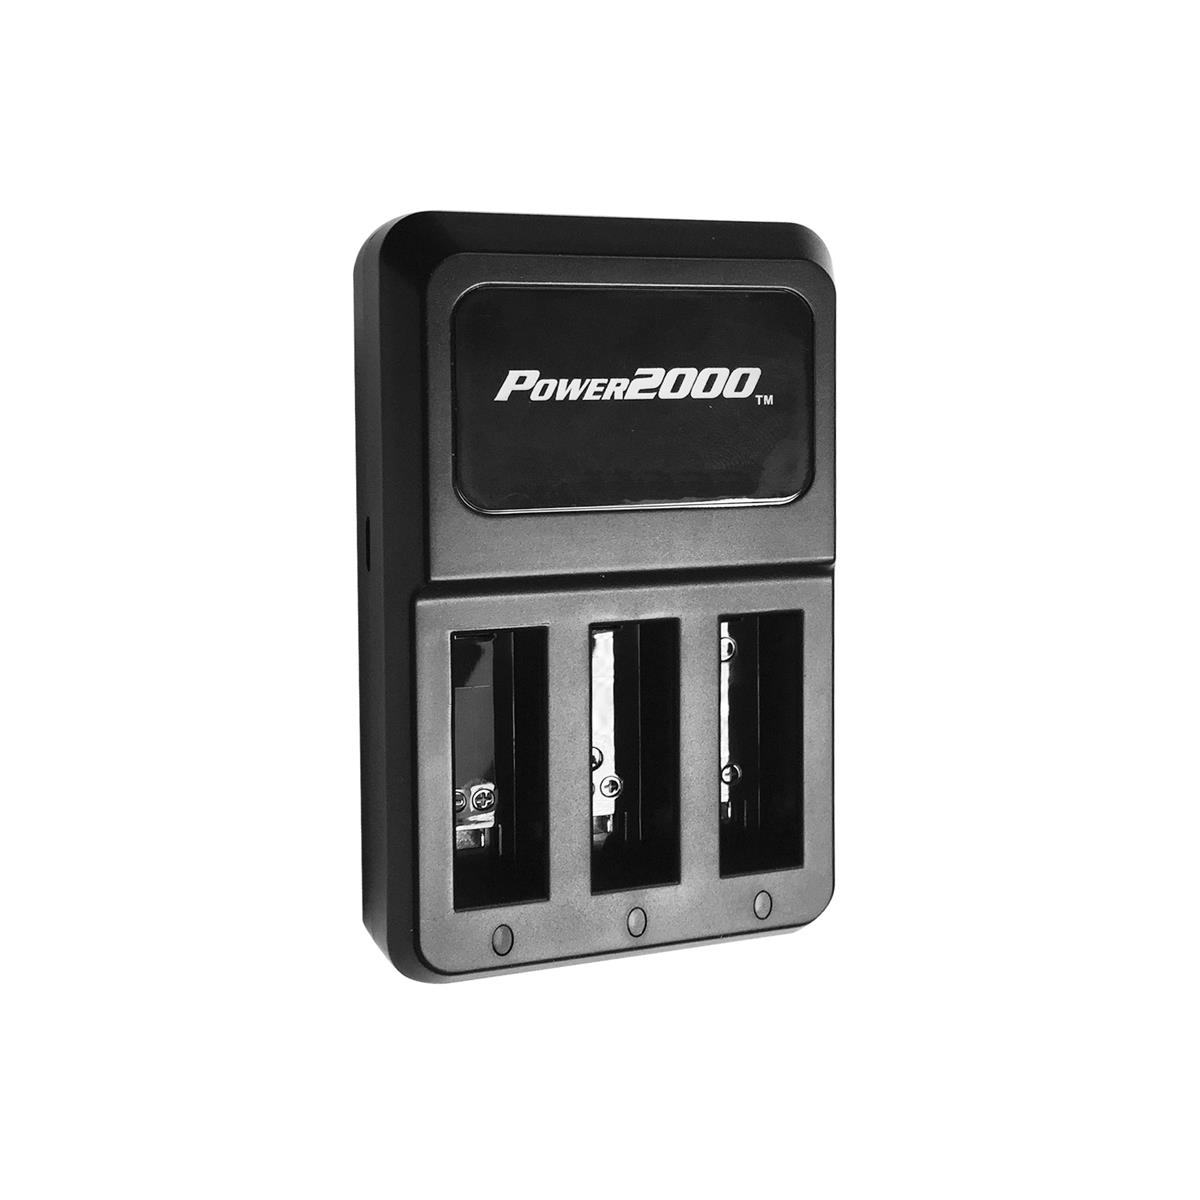 

Power2000 Adorama PT-G4 3-Bay Charger for GoPro Hero4 AHDBT-401 Battery